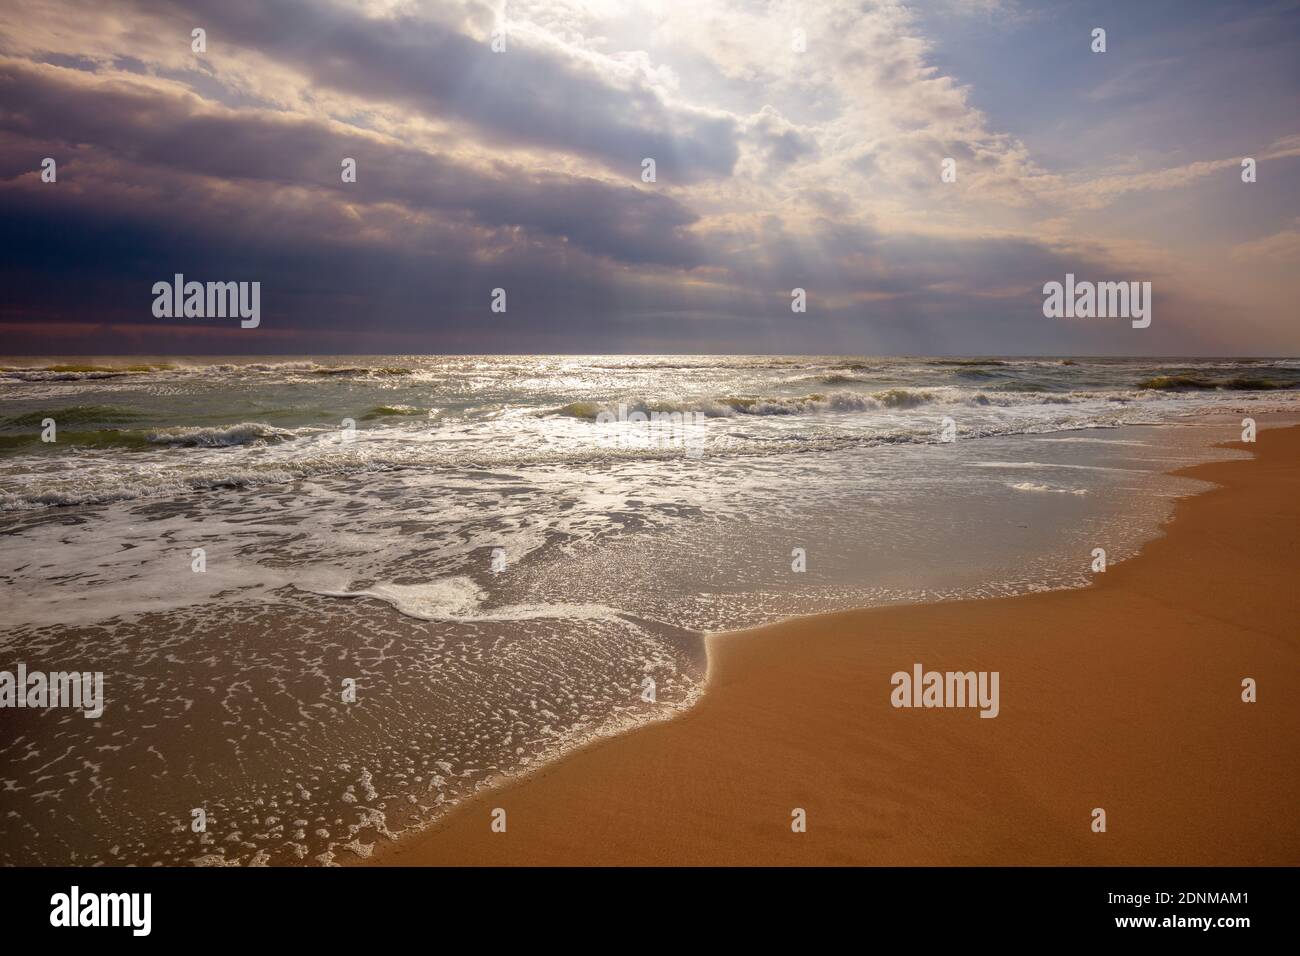 Seascape. Seashore with dramatic sky. Landscape with ocean and bright evening cloudy sky Stock Photo